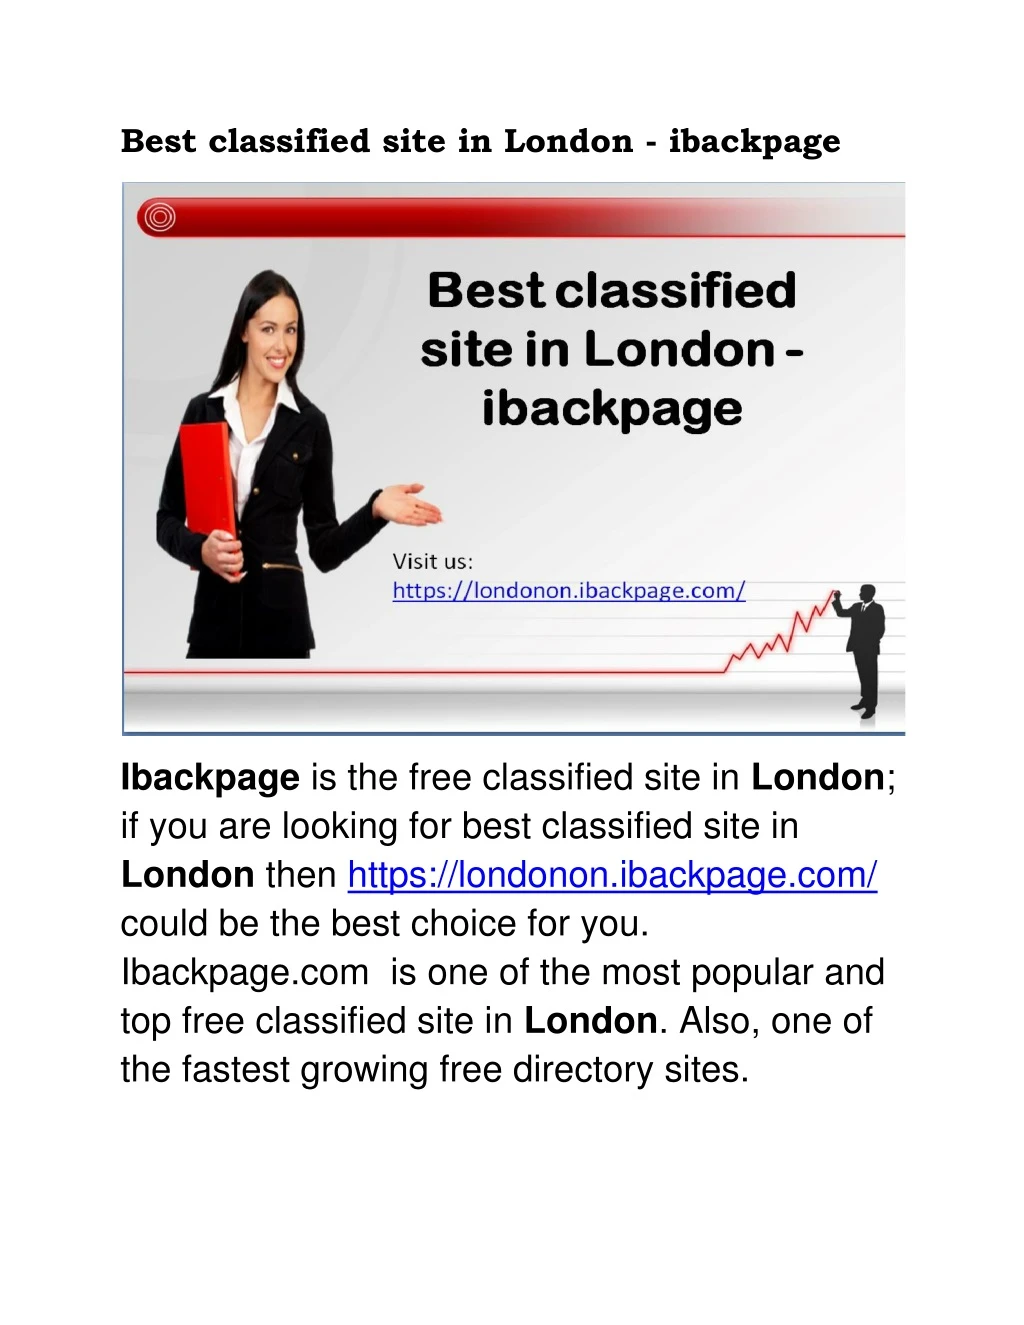 best classified site in london ibackpage